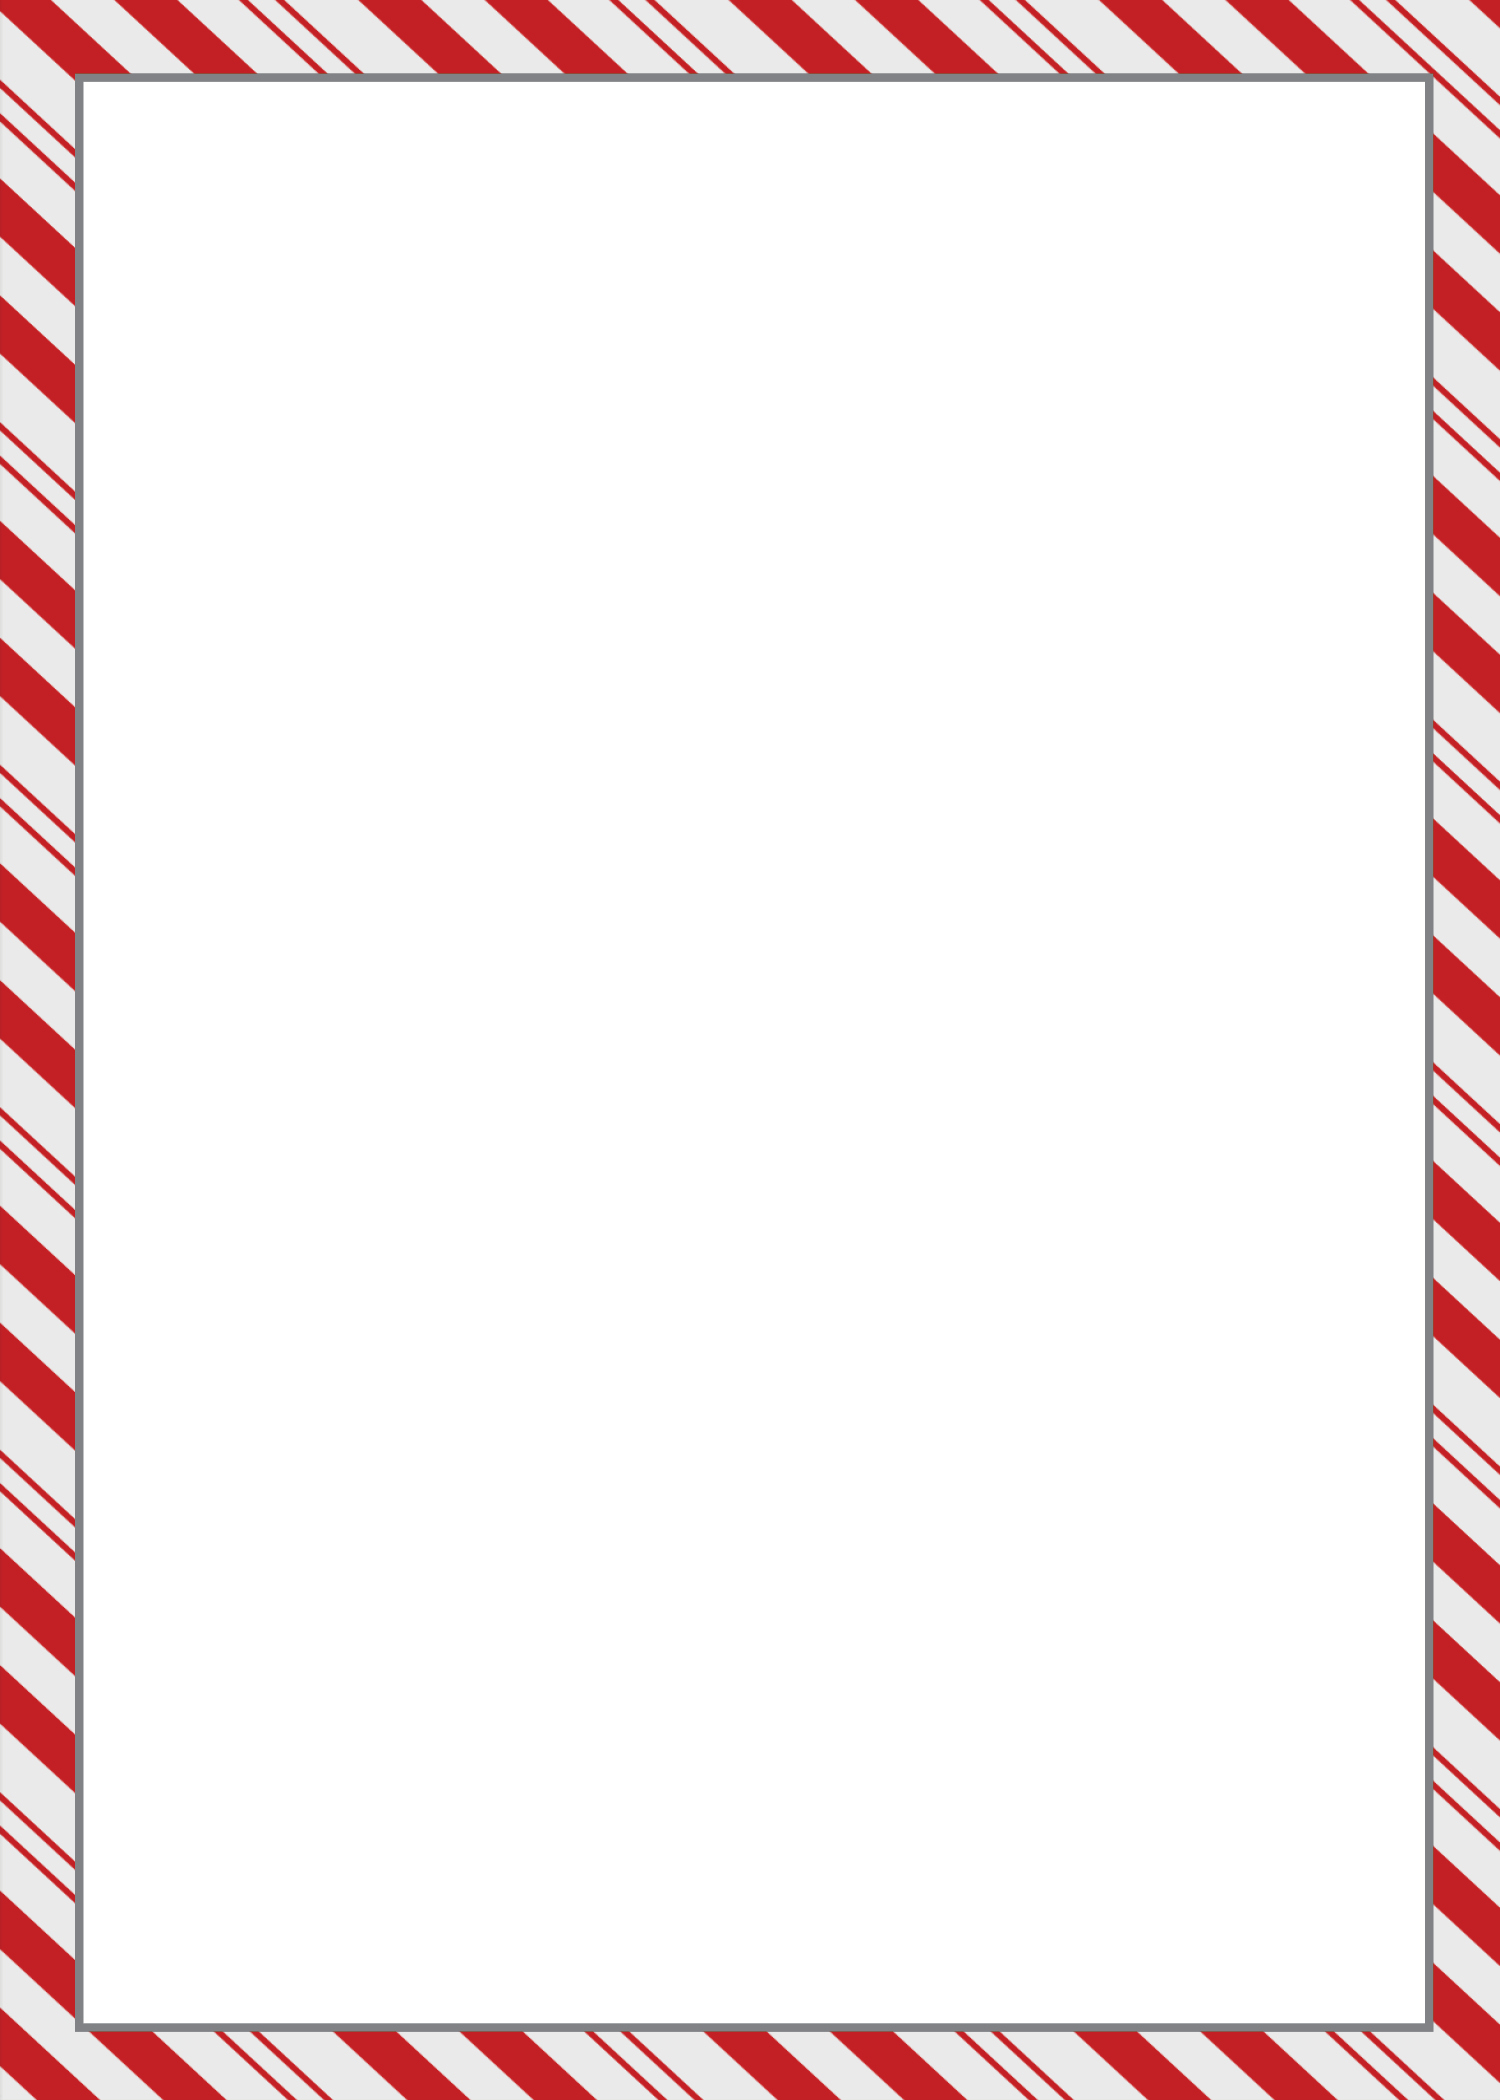 Christmas Candy Cane Border Png | vlr.eng.br